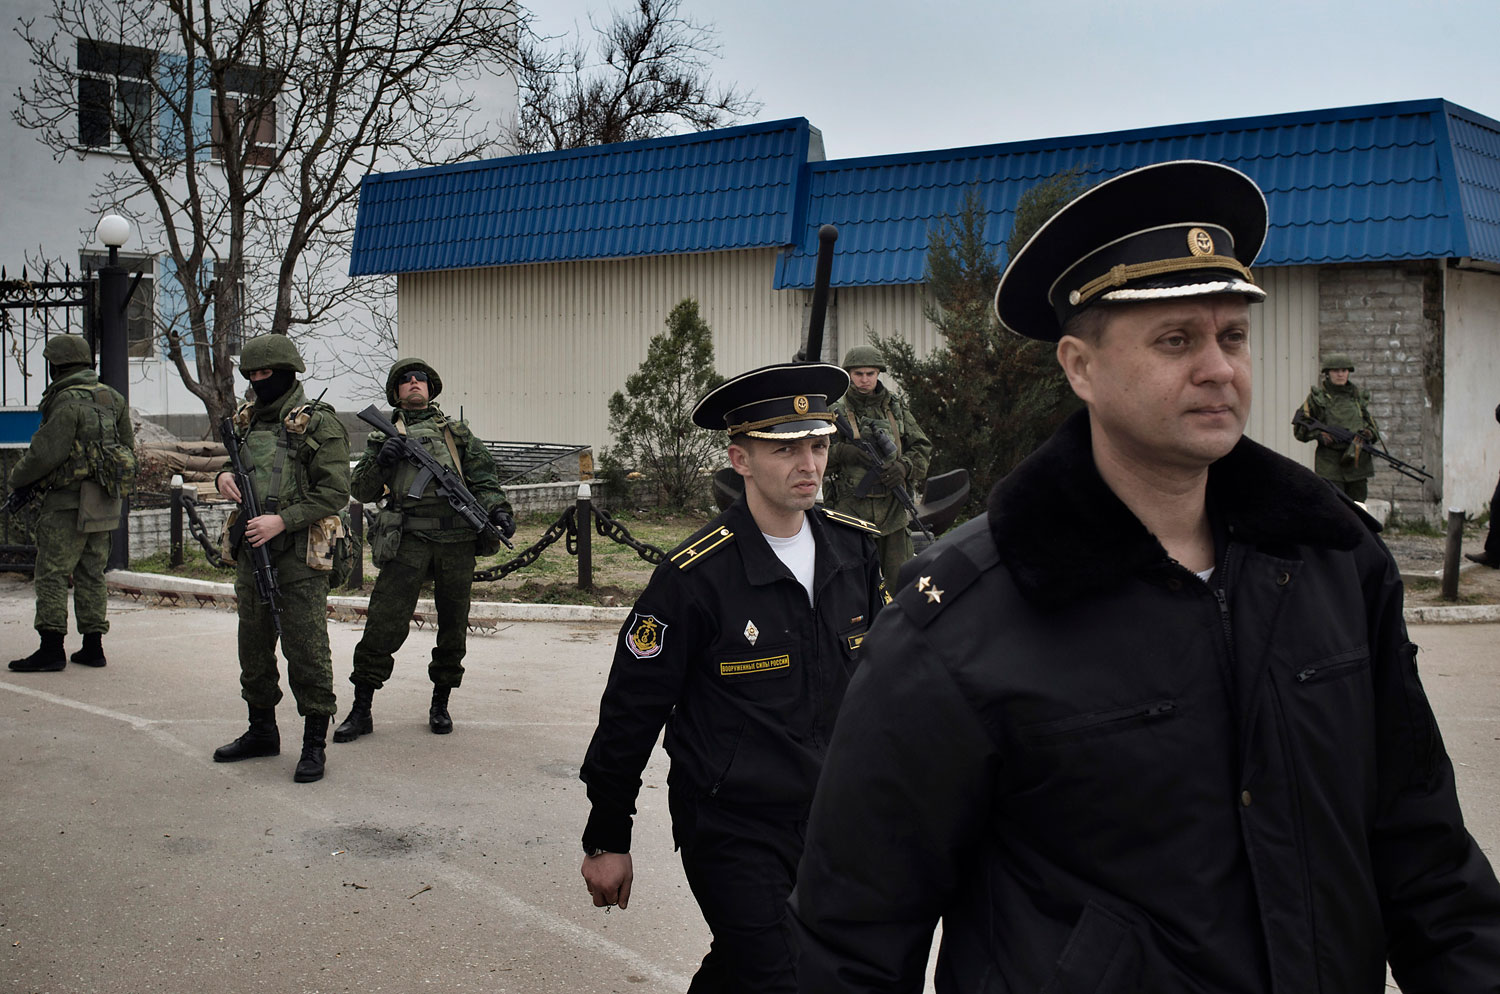 Ukrainian naval officers passed by Russian military personnel as they left the Ukrainian naval headquarters in Sevastopol on Wednesday after Russian forces and local militiamen seized control of the facility, March 19, 2014.